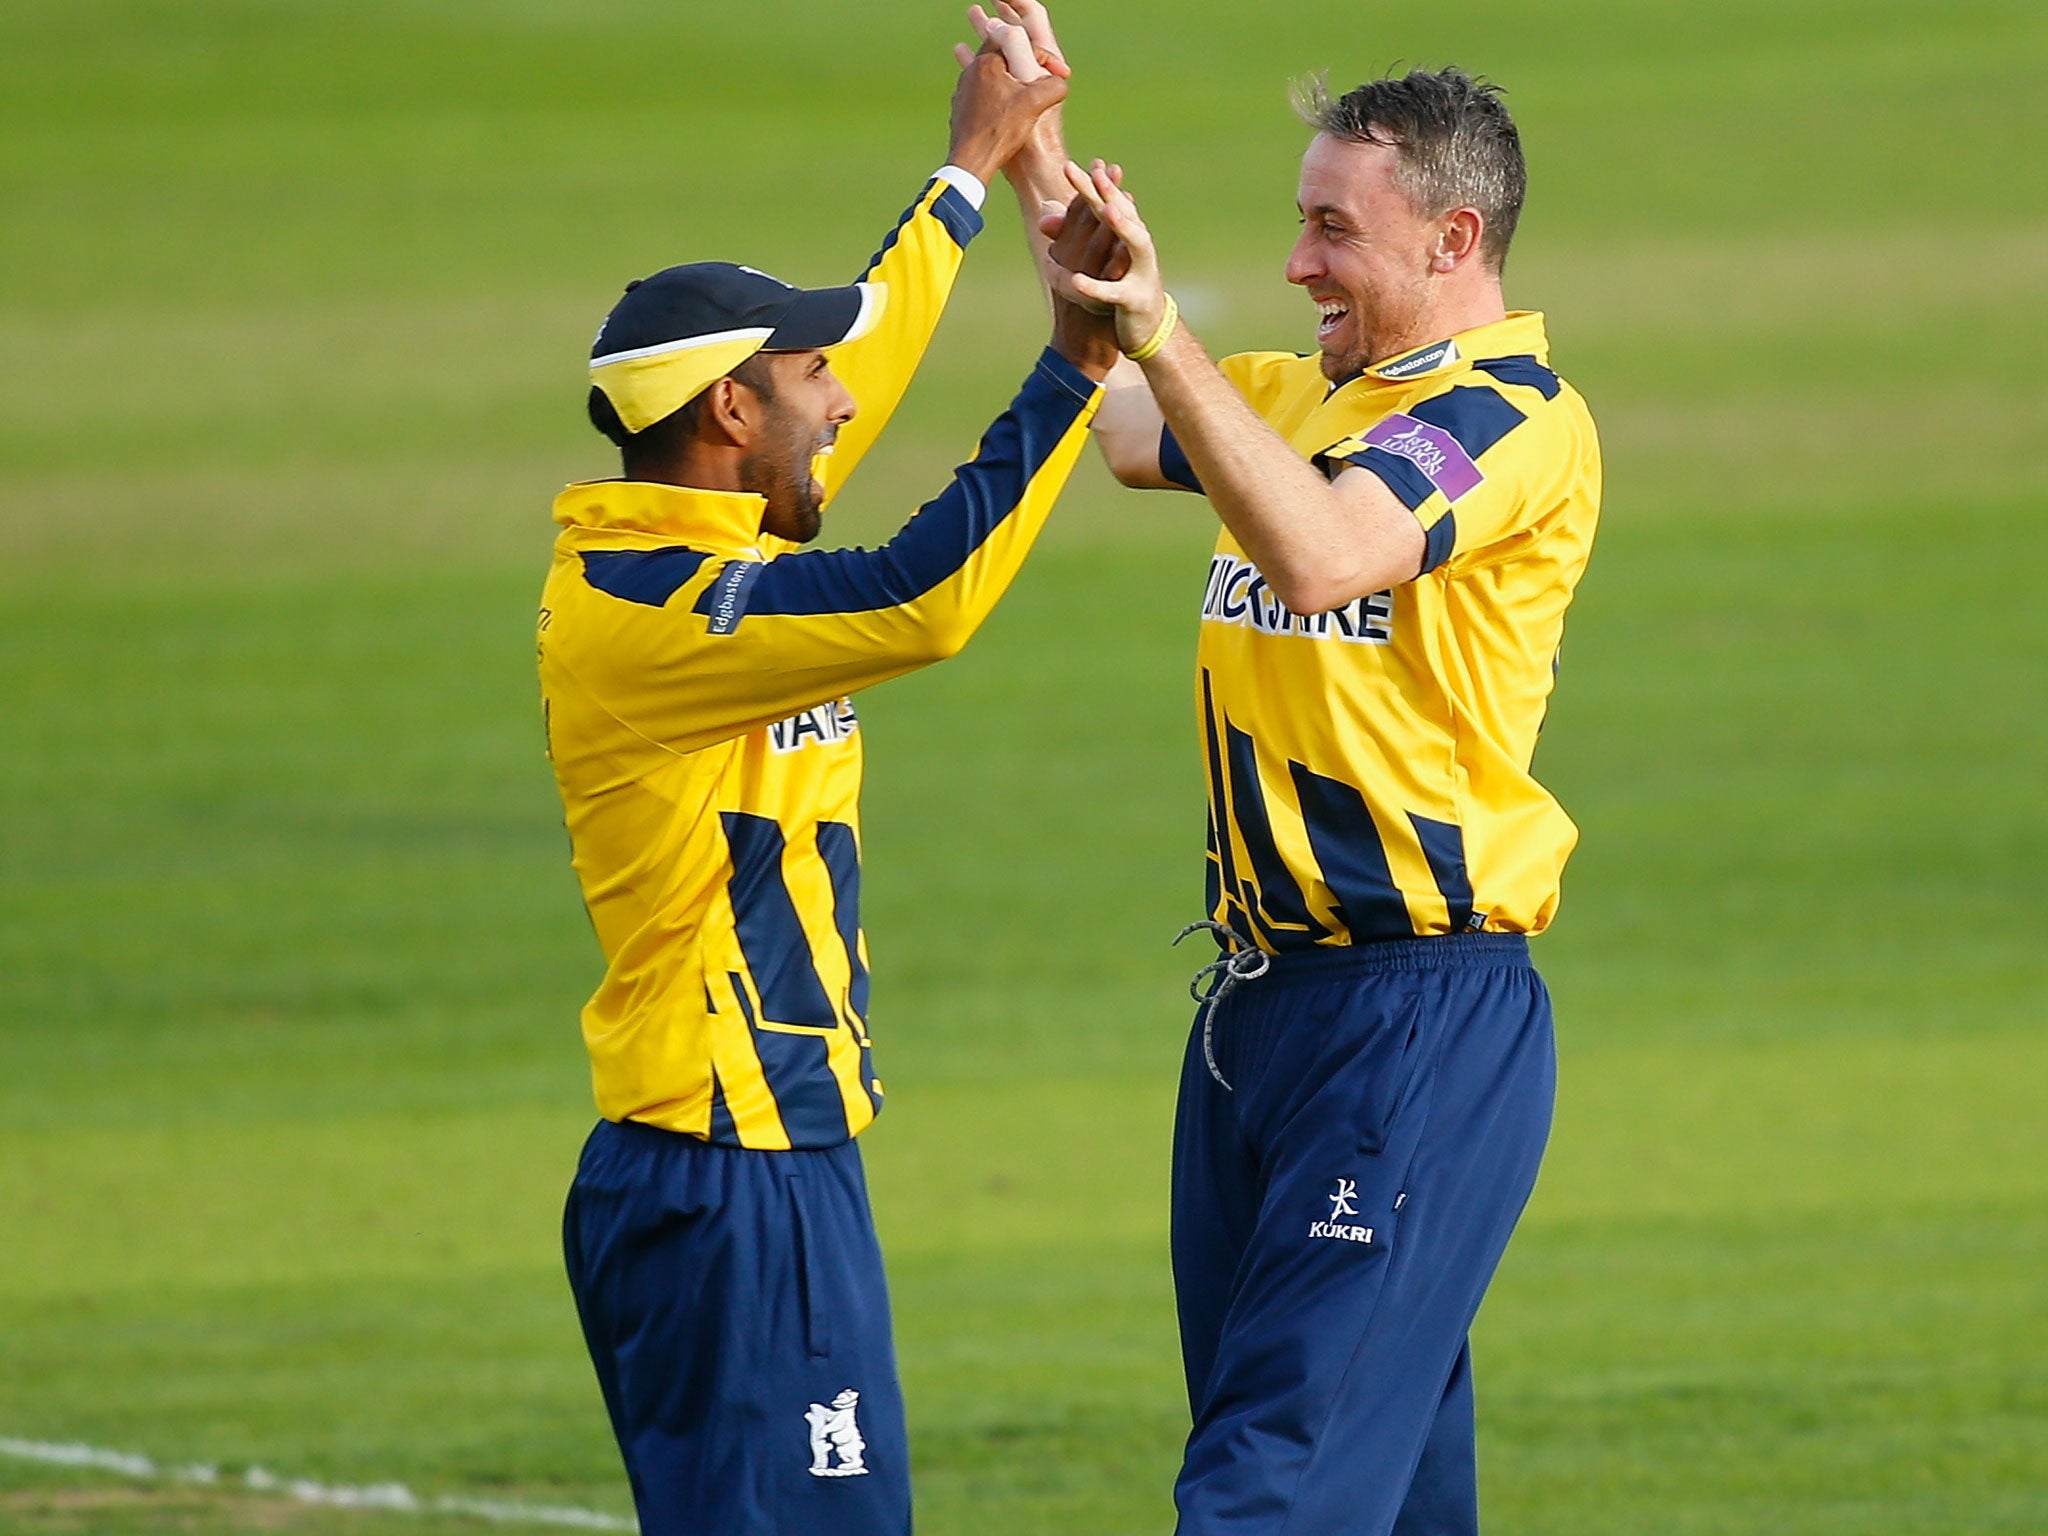 Warwickshire's Rikki Clarke (right) celebrates with team-mate Varun Chopra after he dismissed Tom Westley of Essex during the Royal London One-Day Cup quarter final